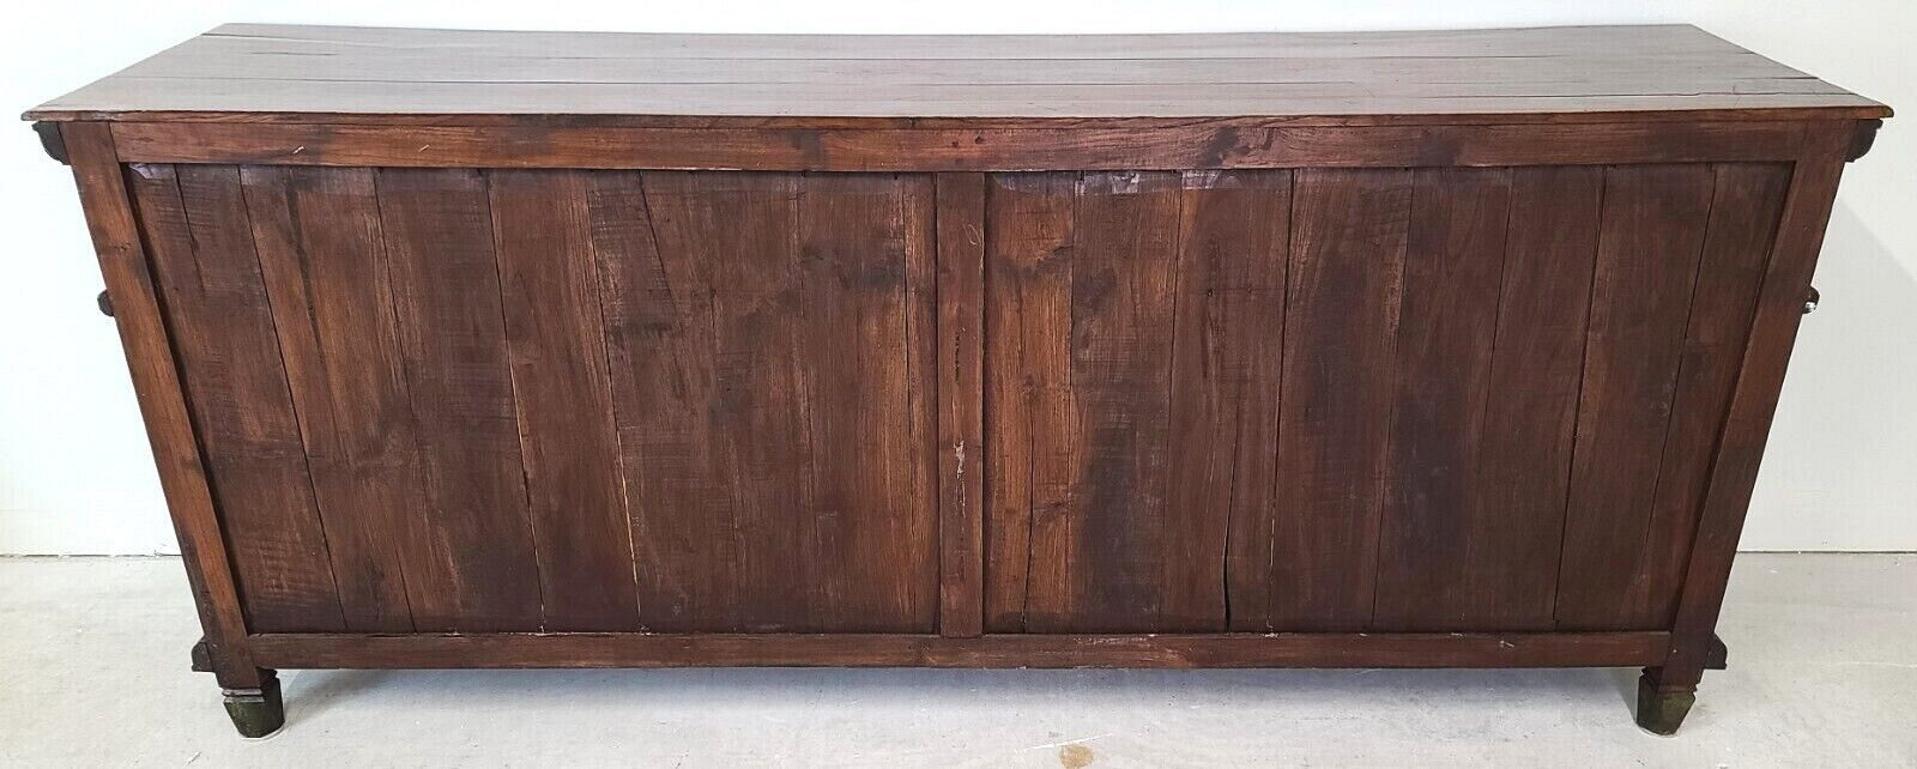 Antique Polychrome French Country Credenza Bar Sideboard 3